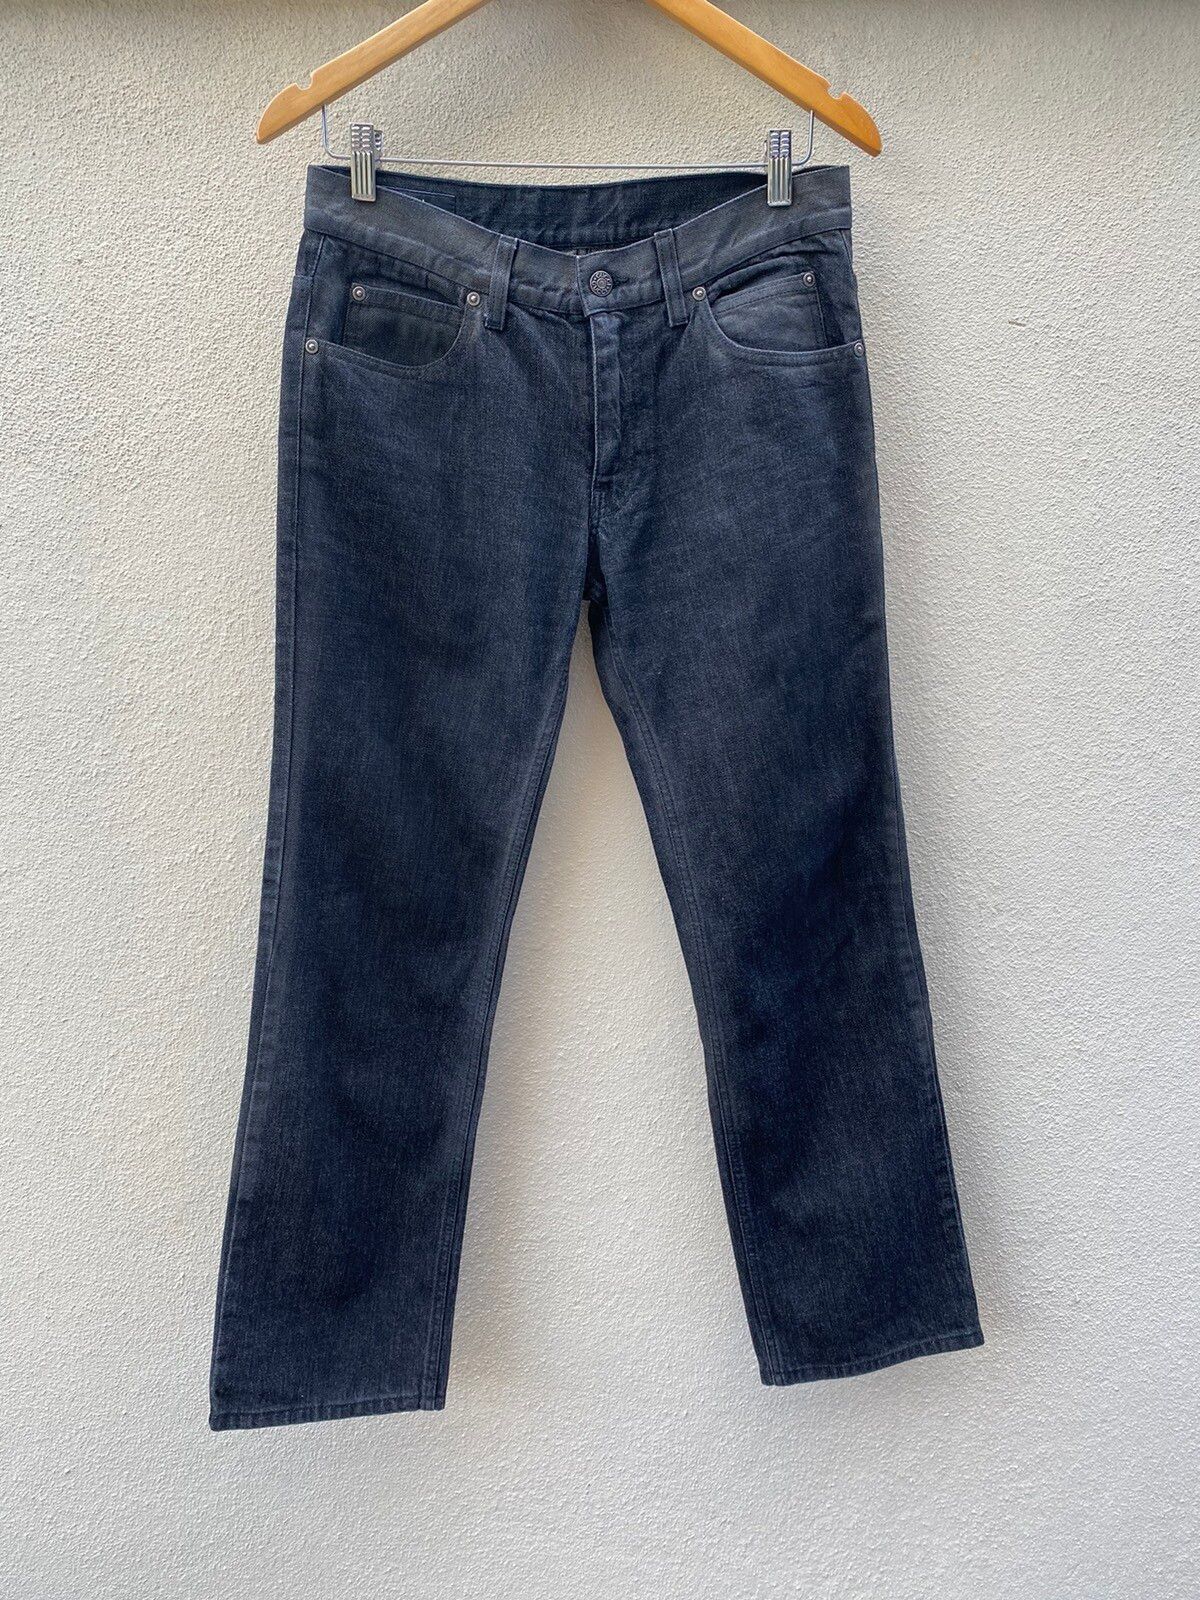 GUCCI Straight Cut Jeans Made in Italy - 1